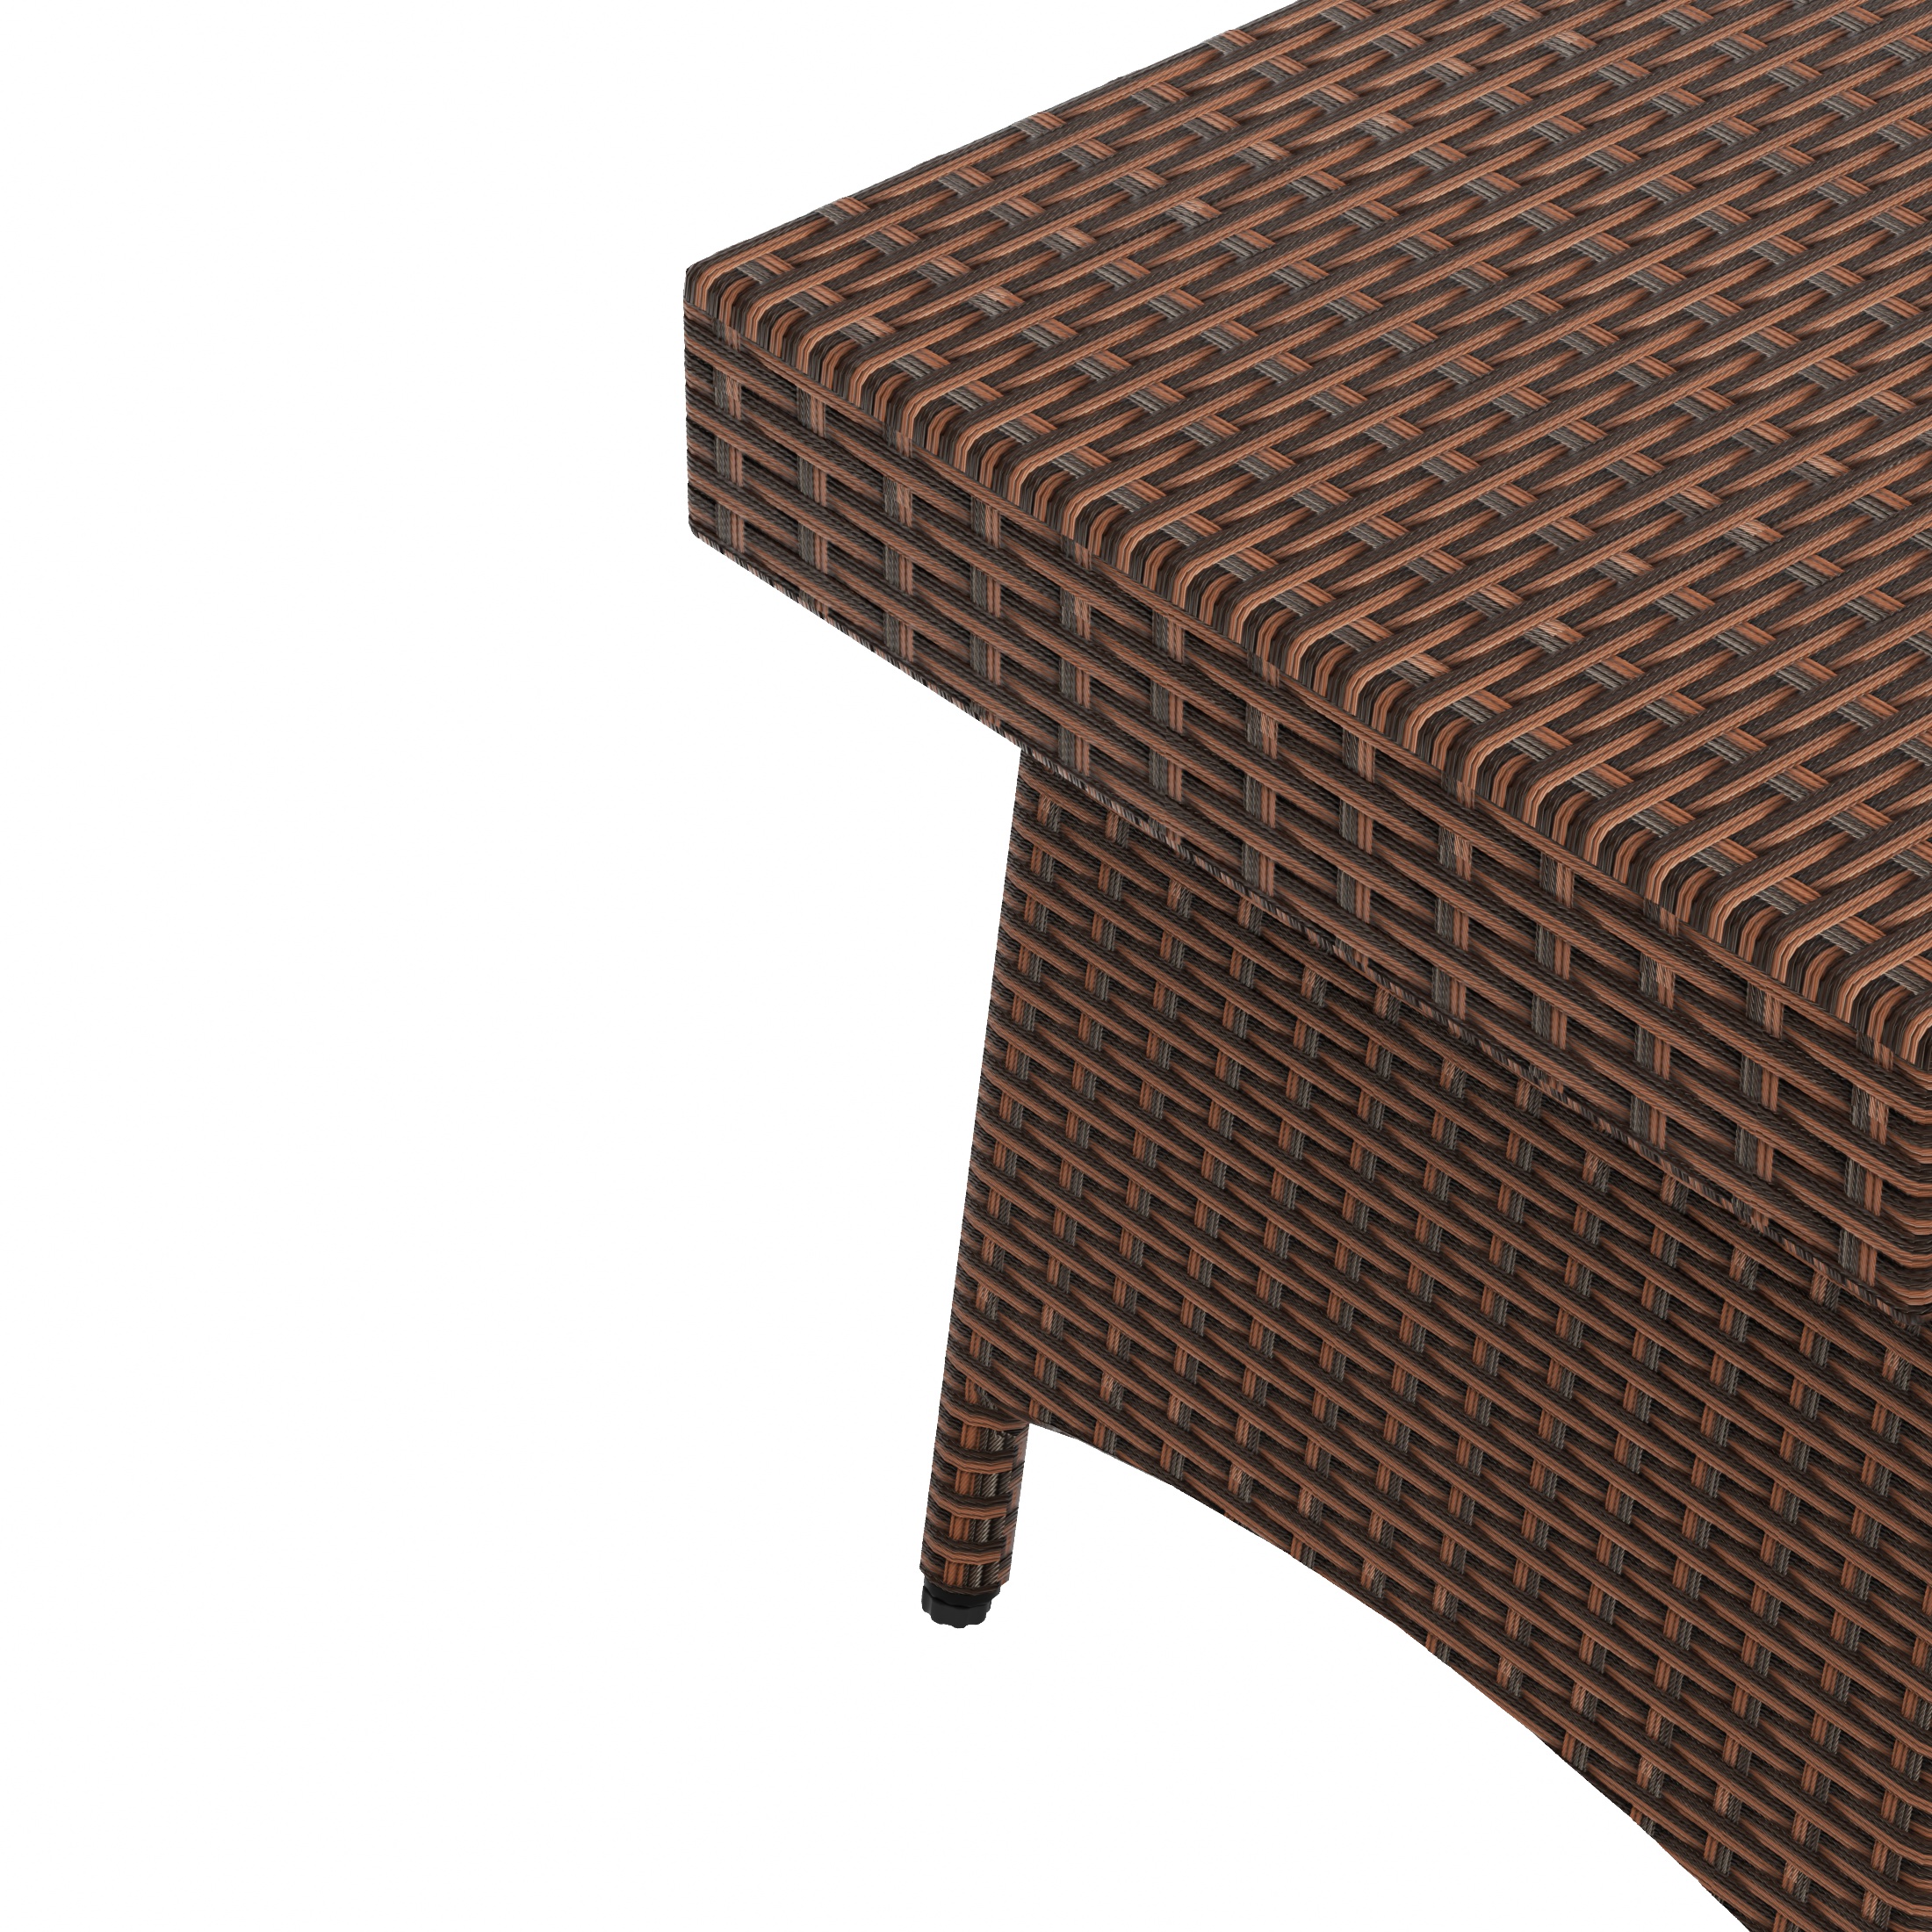 WestinTrends Coastal Outdoor Folding Side Table, 23" x 15" All Weather PE Rattan Wicker Small Patio Table Portable Picnic Table, Brown - image 2 of 7